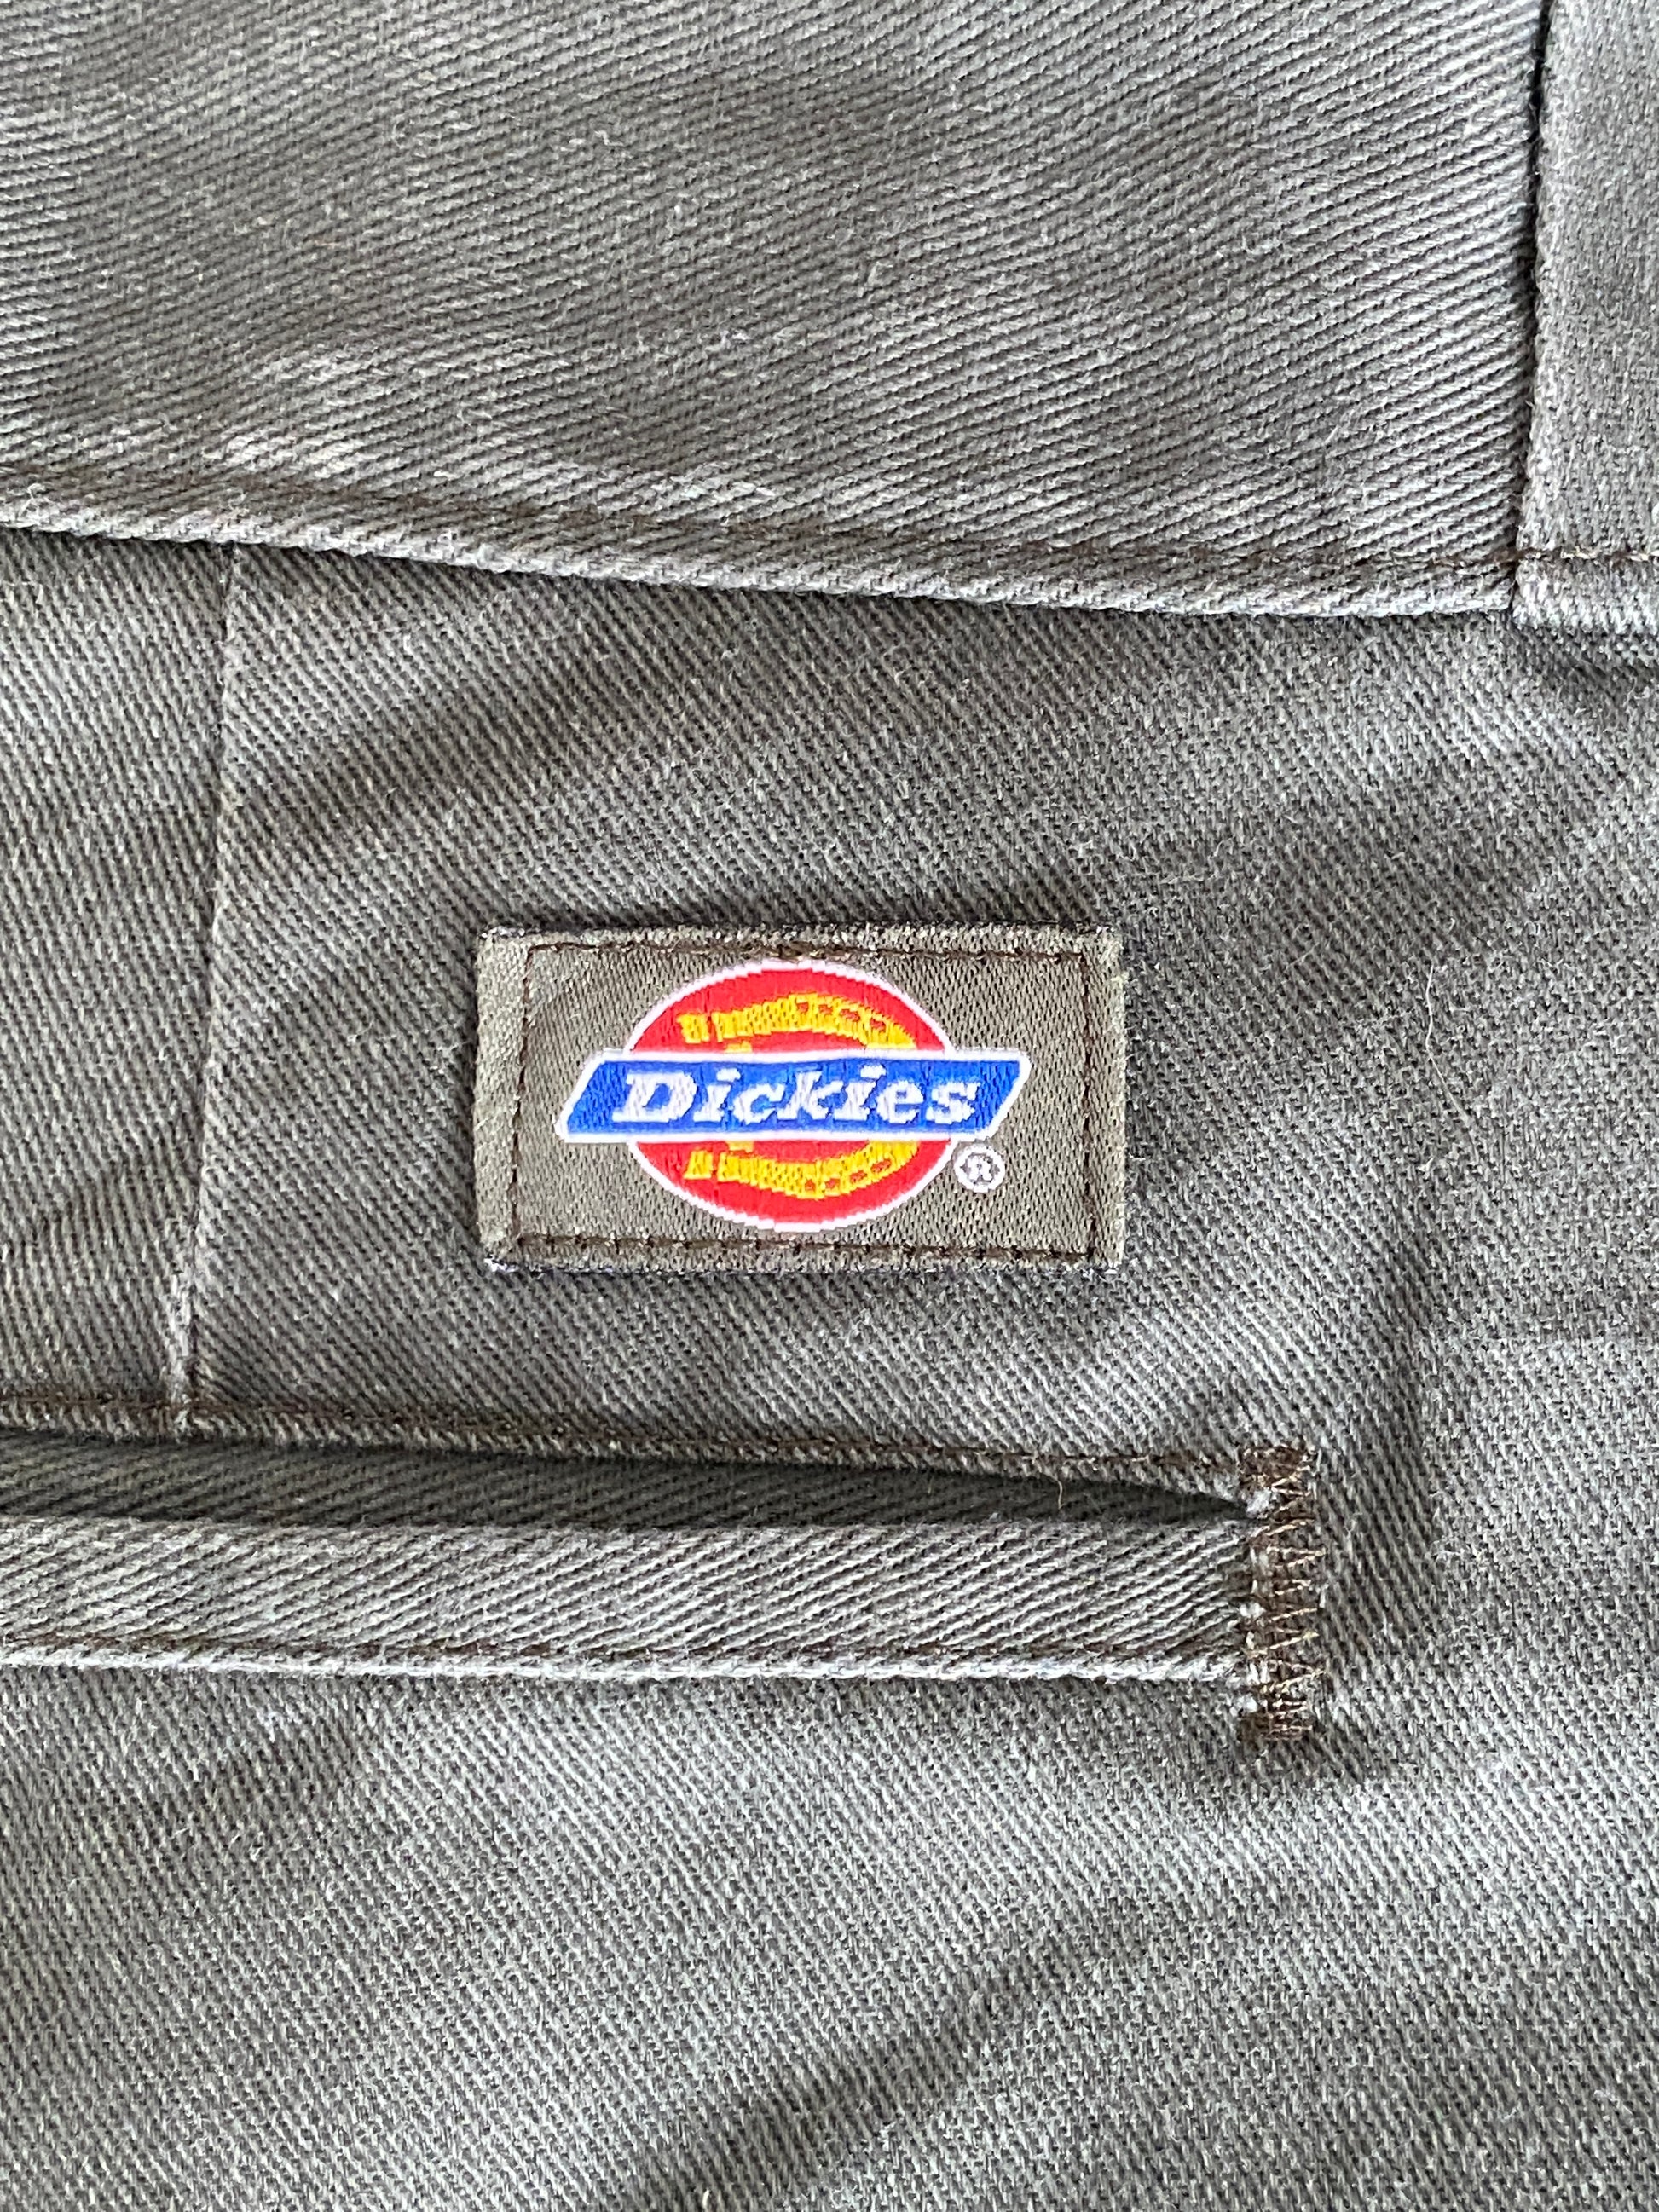 Green Vintage Dickies Pants Model 874 Size 38X30: Classic Workwear Apparel